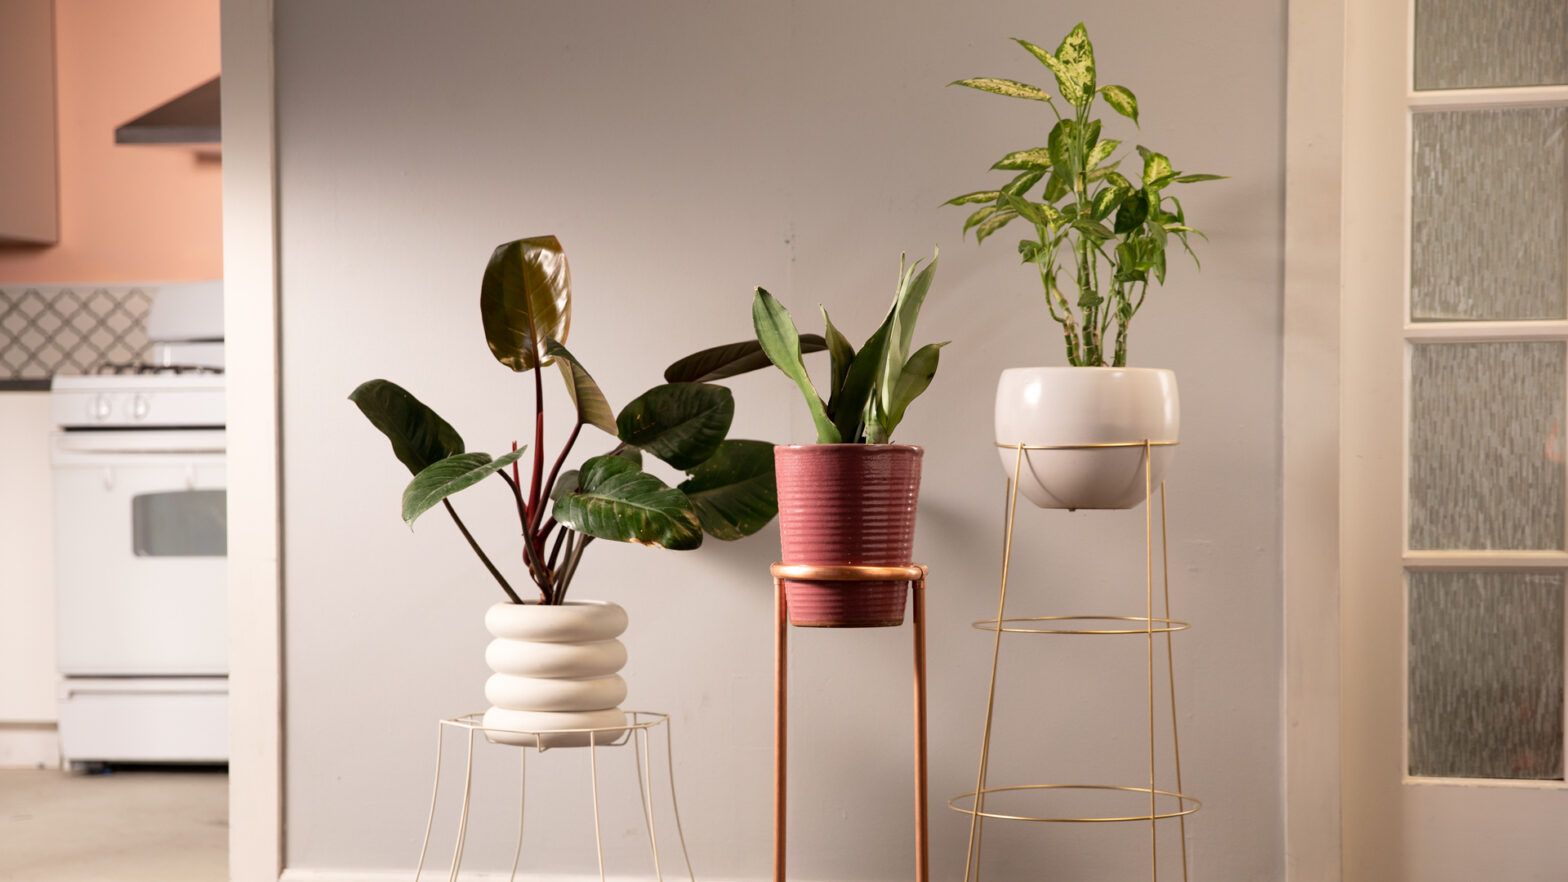 Diy Modern Plant Stands 3 Ways In 15 Minutes Or Less | Geico Living Intended For Modern Plant Stands (View 10 of 15)